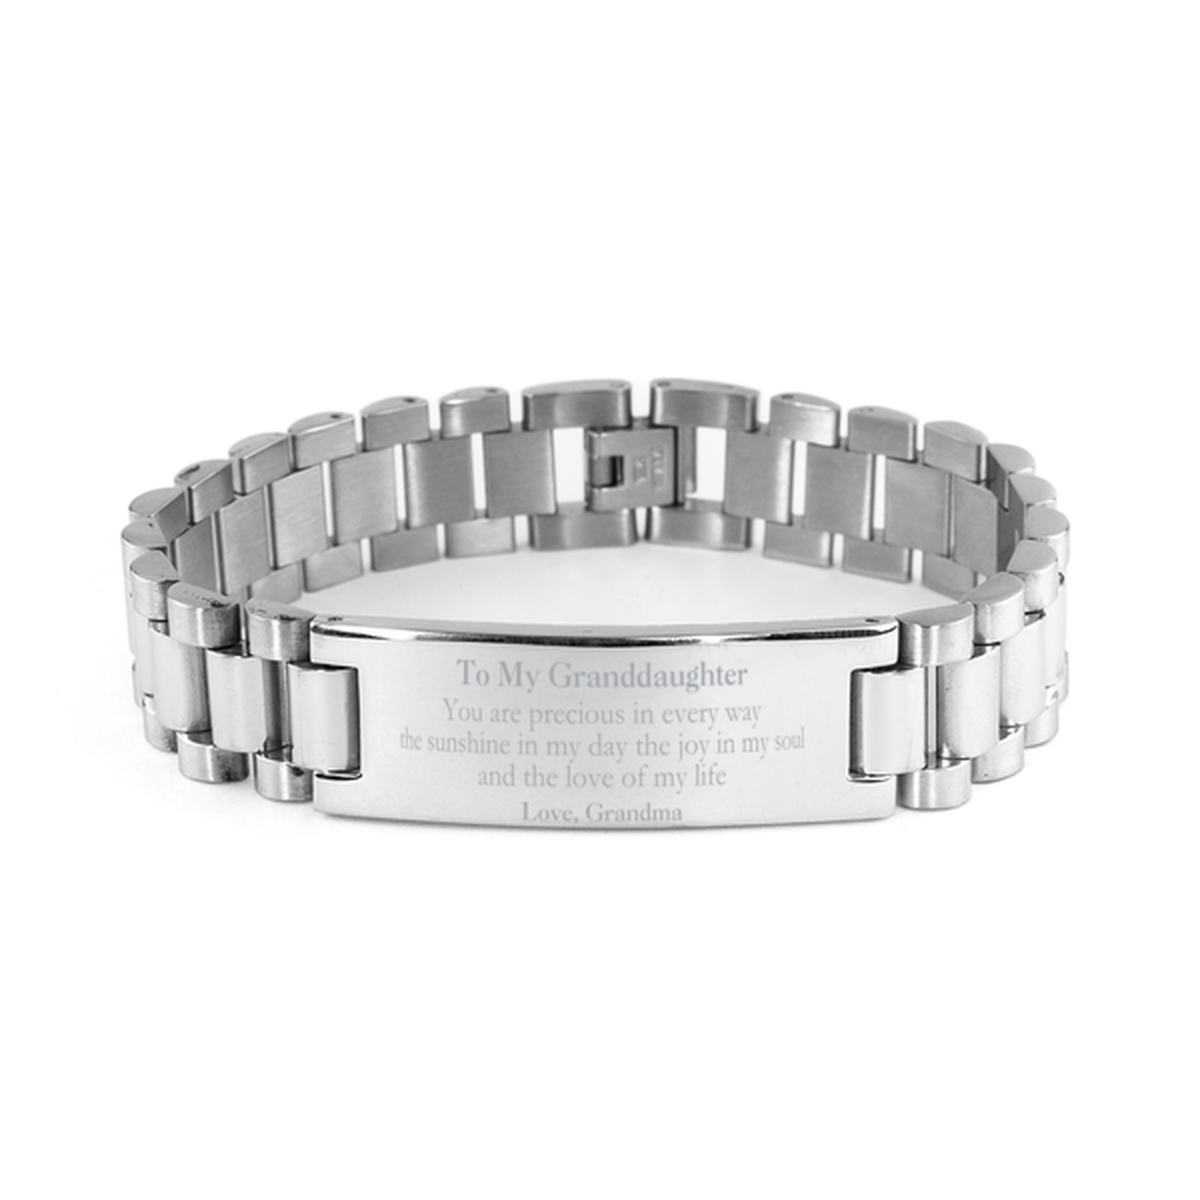 Graduation Gifts for Granddaughter Ladder Stainless Steel Bracelet Present from Grandma, Christmas Granddaughter Birthday Gifts Granddaughter You are precious in every way the sunshine in my day. Love, Grandma